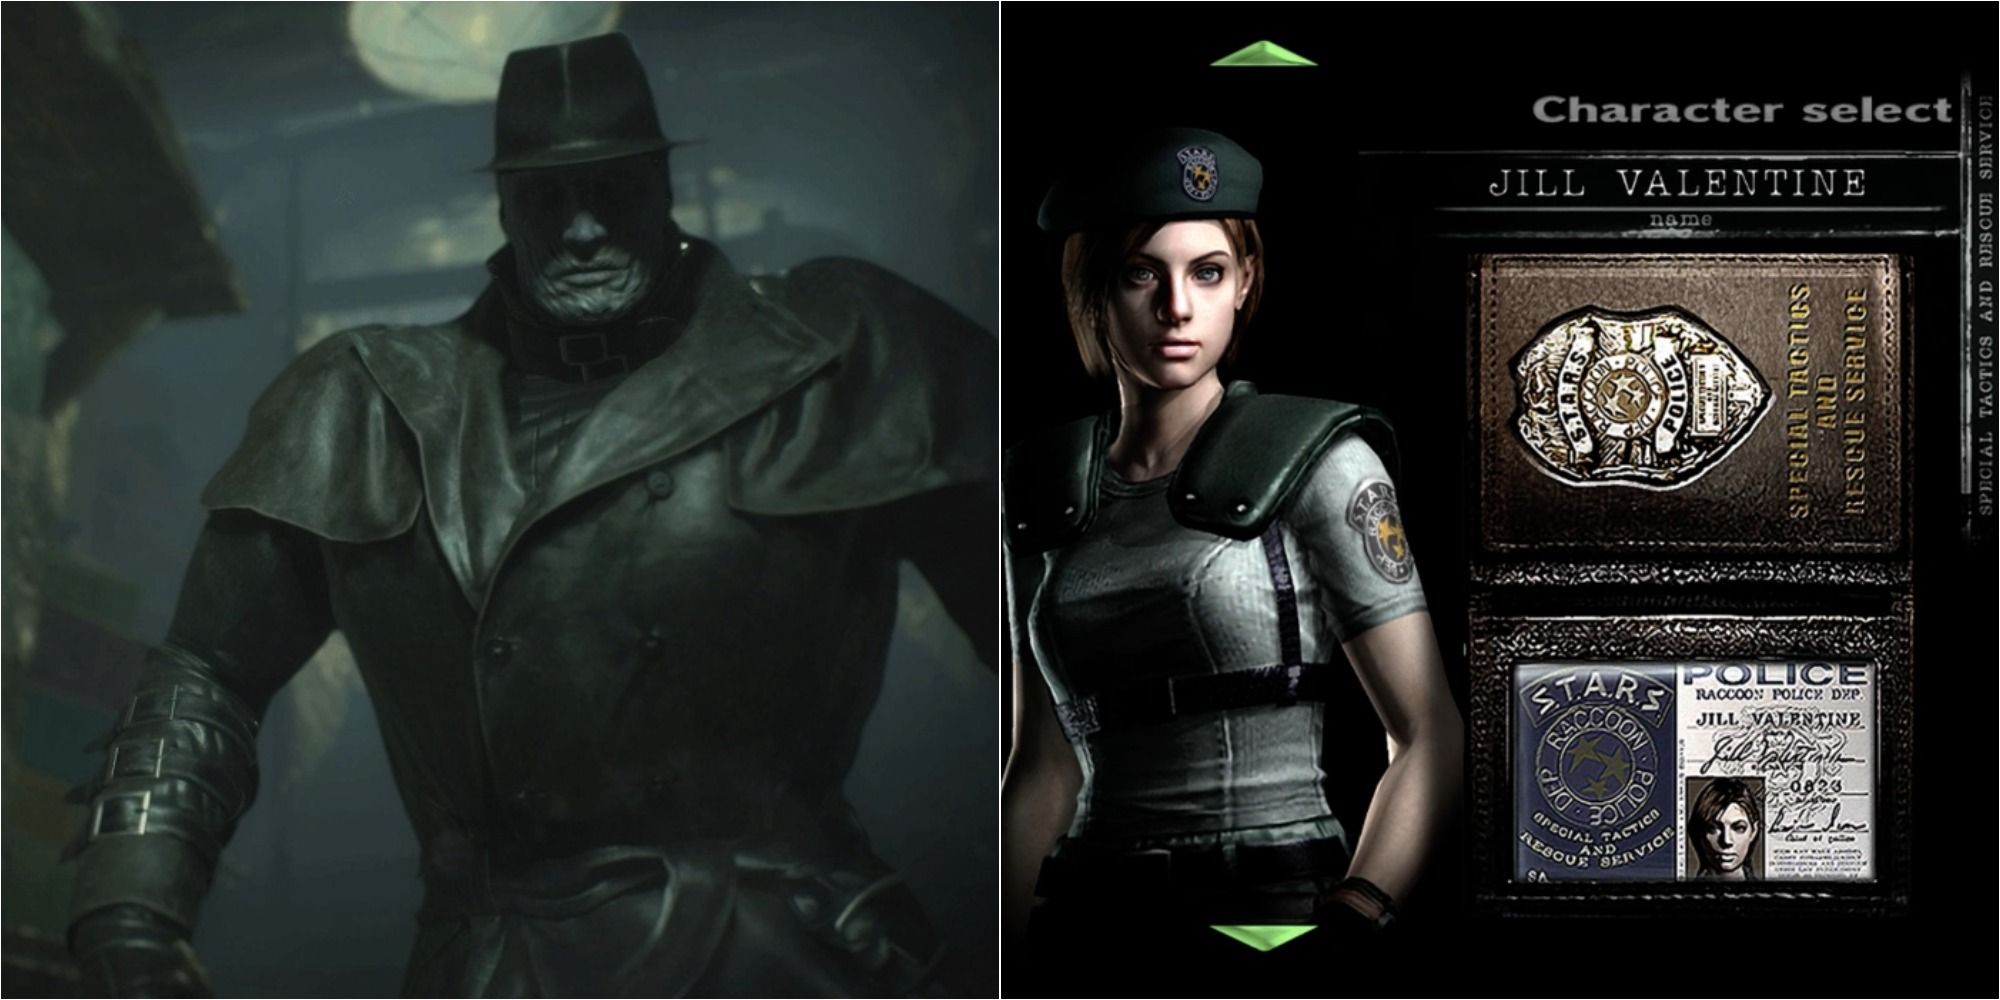 Resident Evil Featured Image Of Mr. X and Jill Character Select